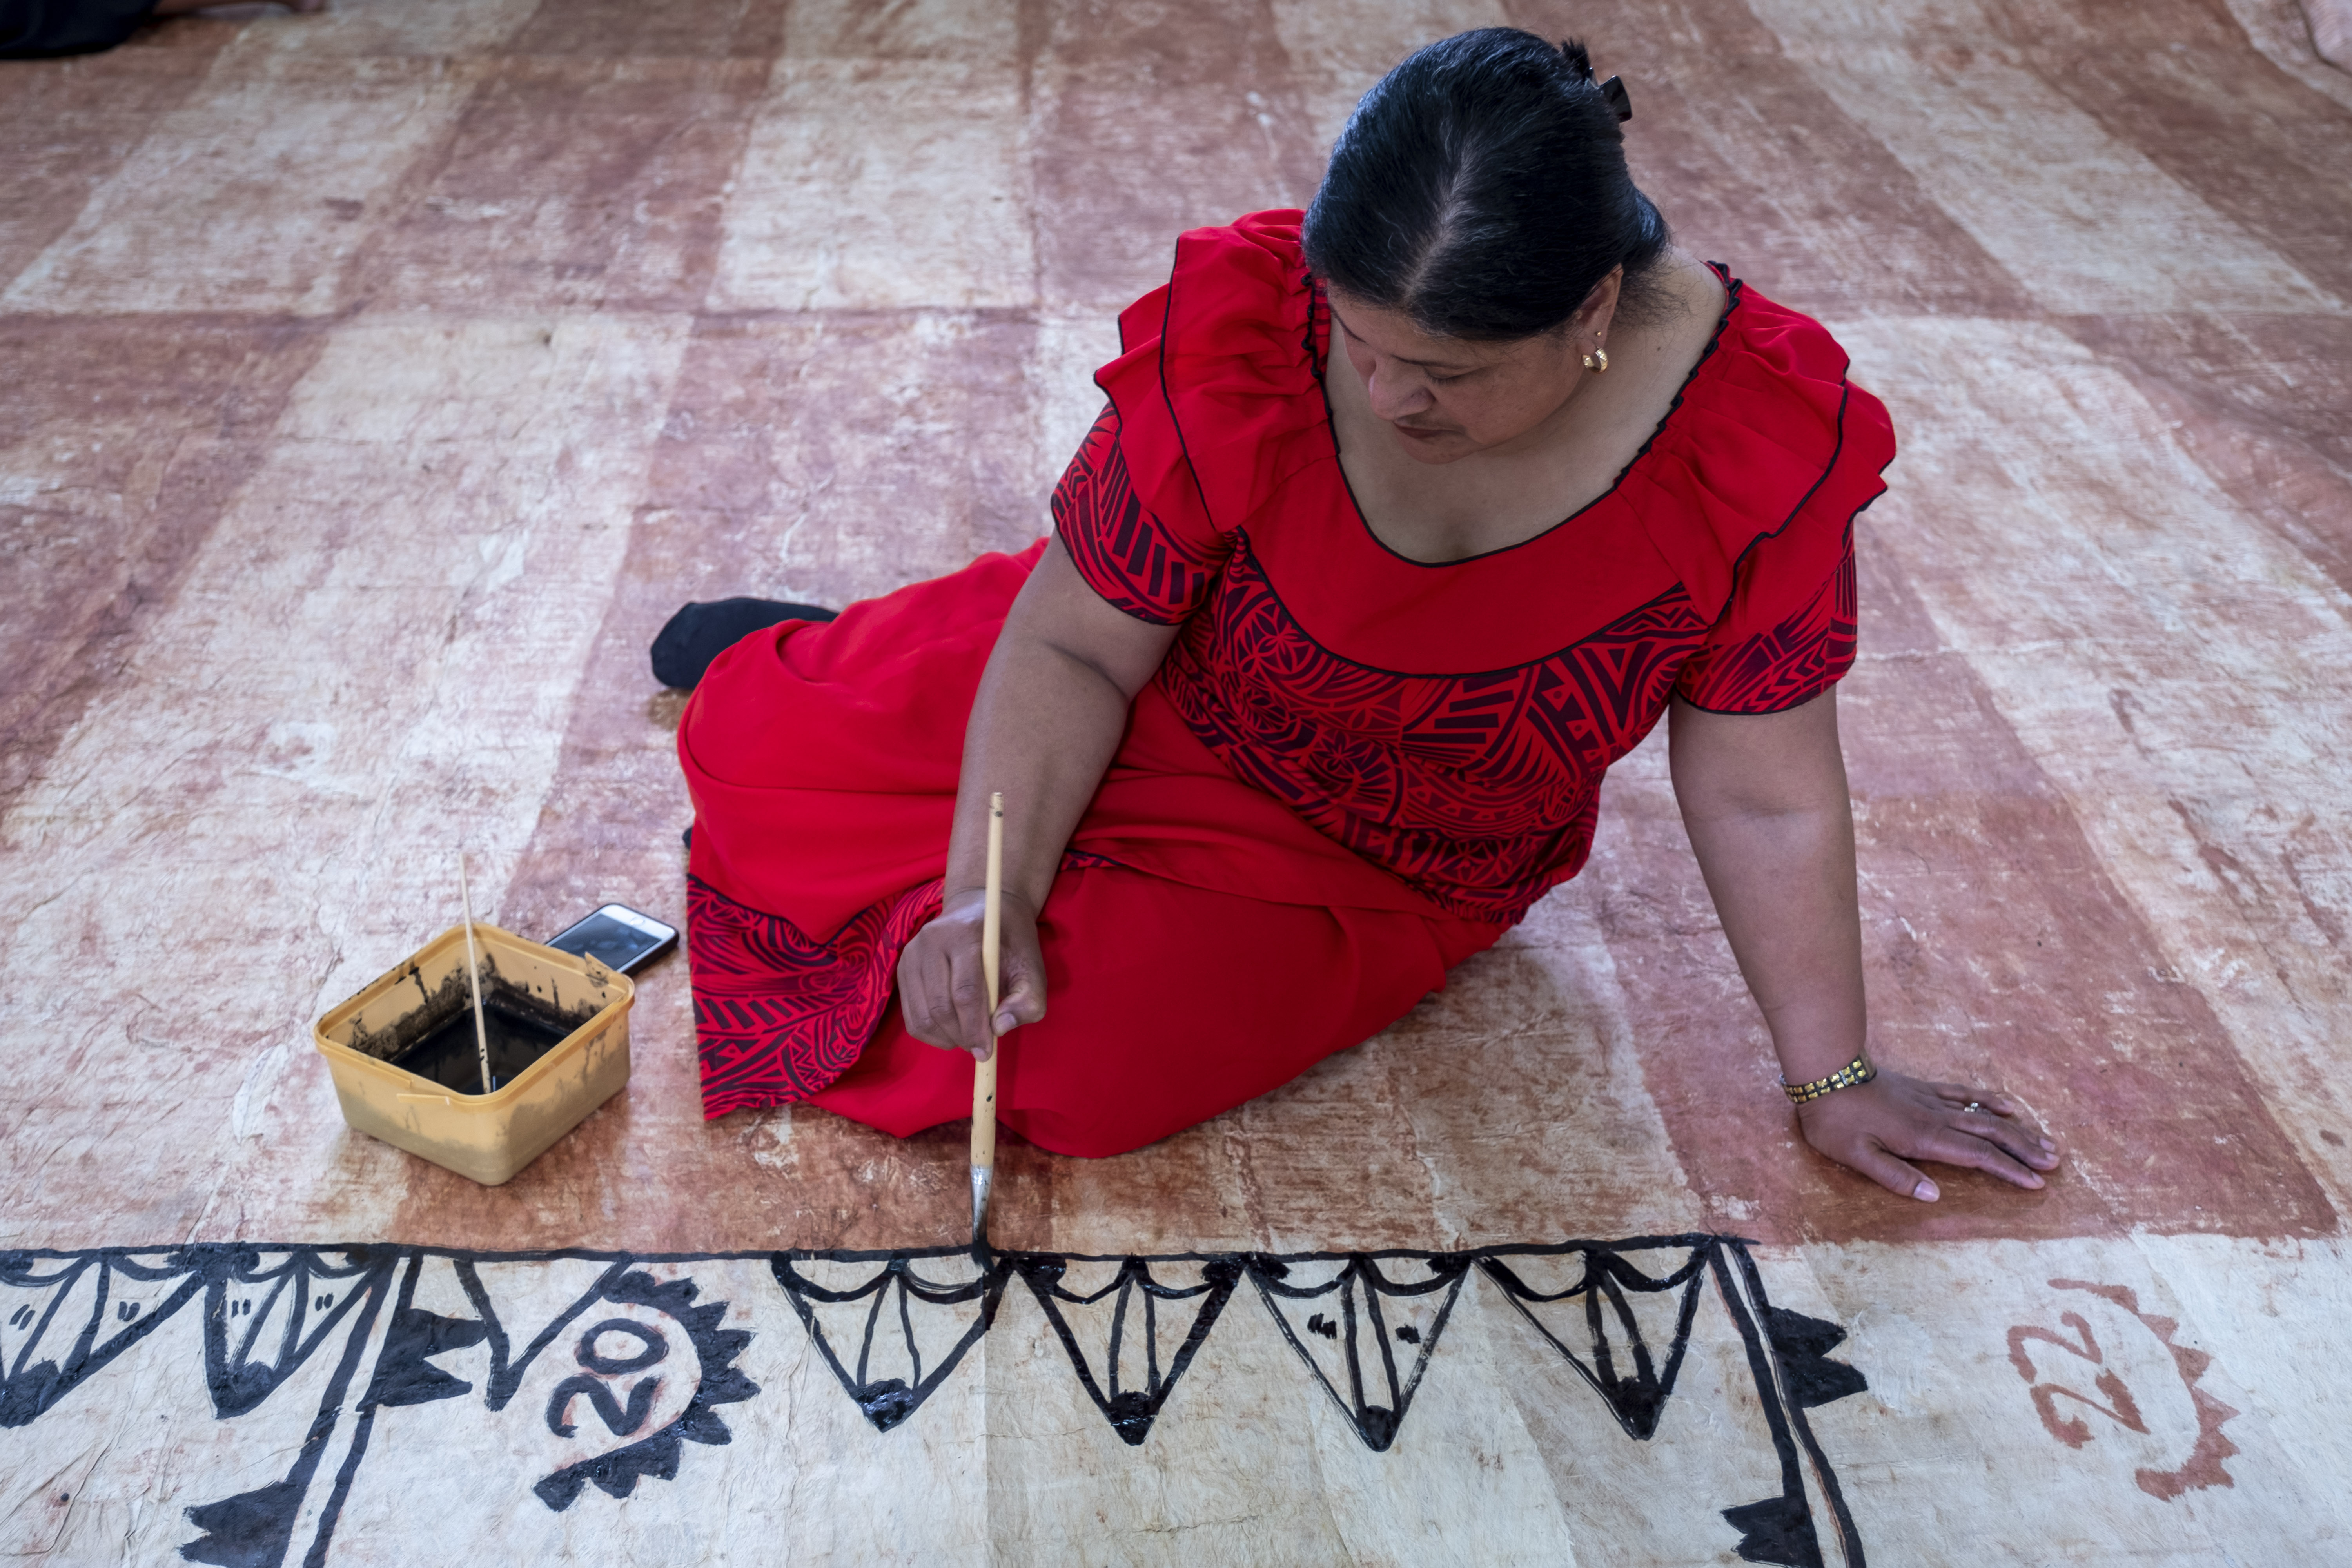 A woman in a red dress painting black ink on a tapa cloth on the floor